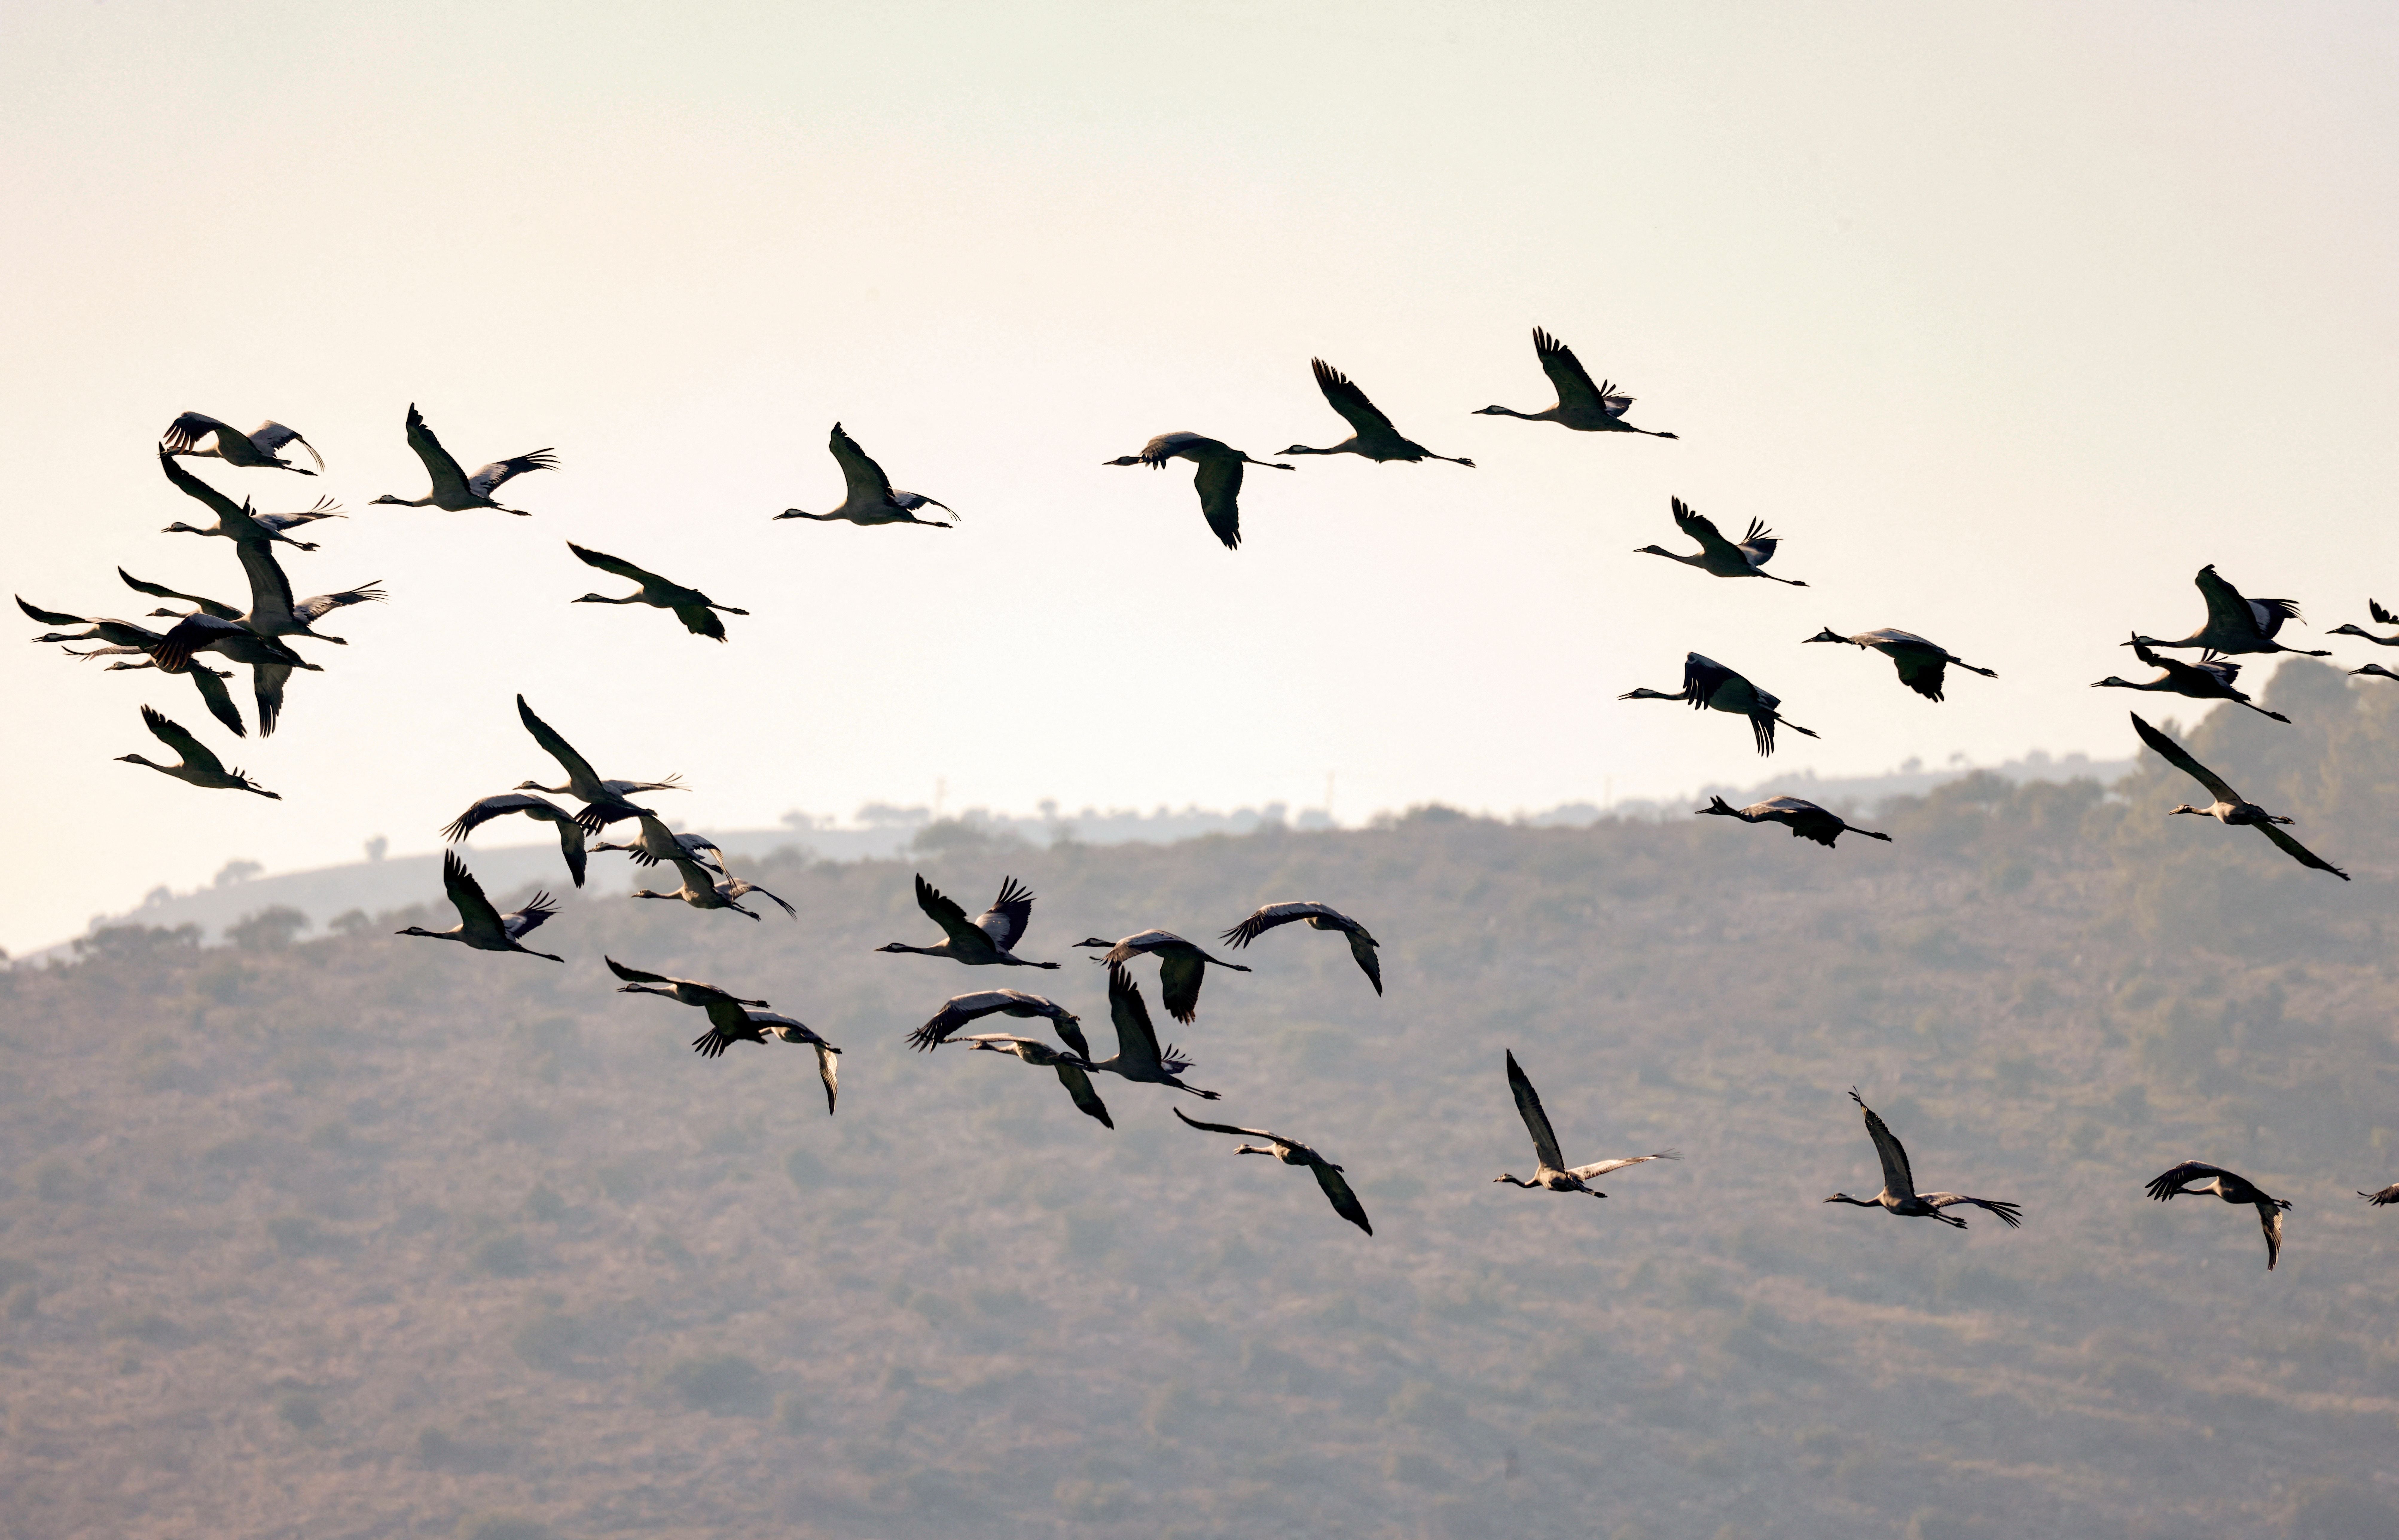 Gray Cranes fly above the northern Israeli Hula valley, an important point on their migratory path towards Africa, on December 26, 2021